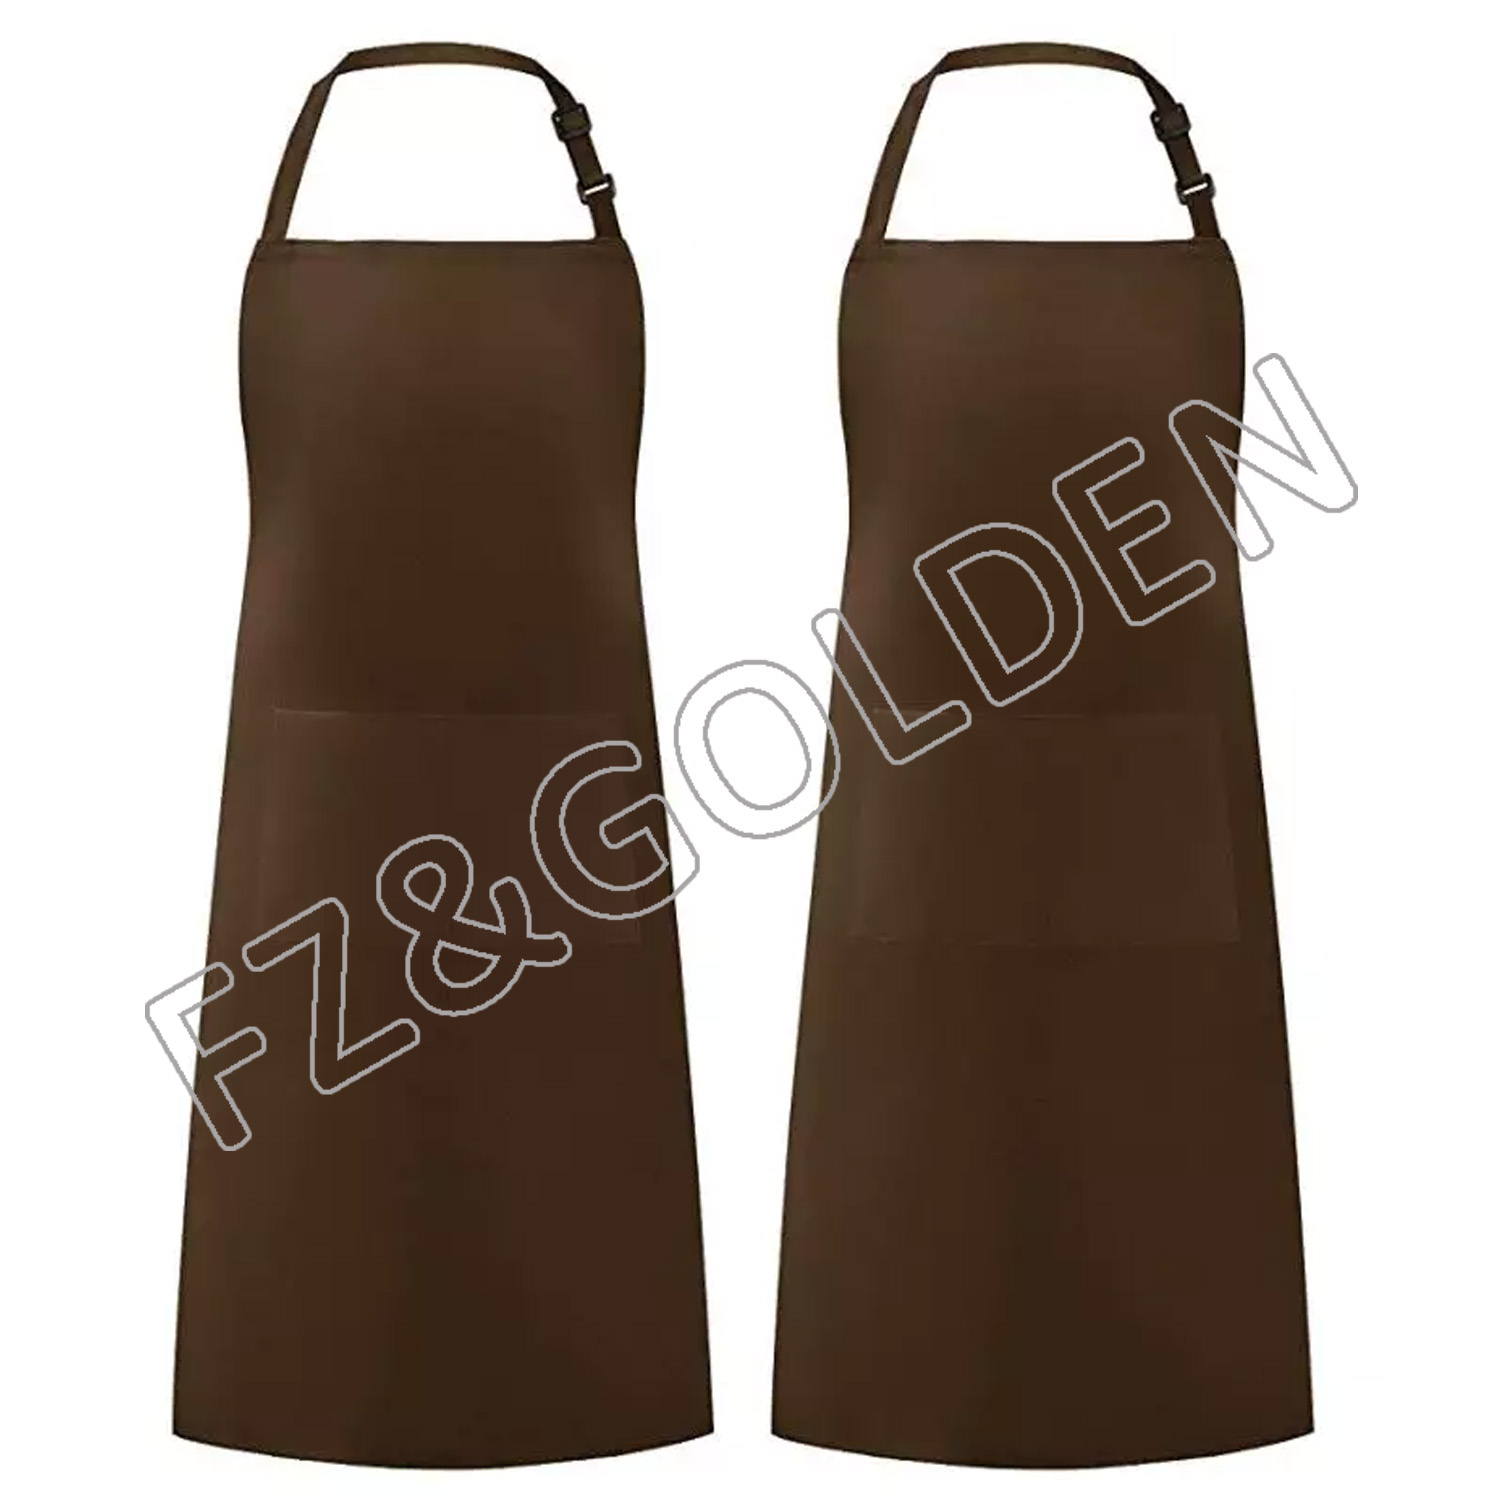 New arrival Custom print Logo Adjustable cute funny kitchen Baking Grill cotton cooking aprons for men women